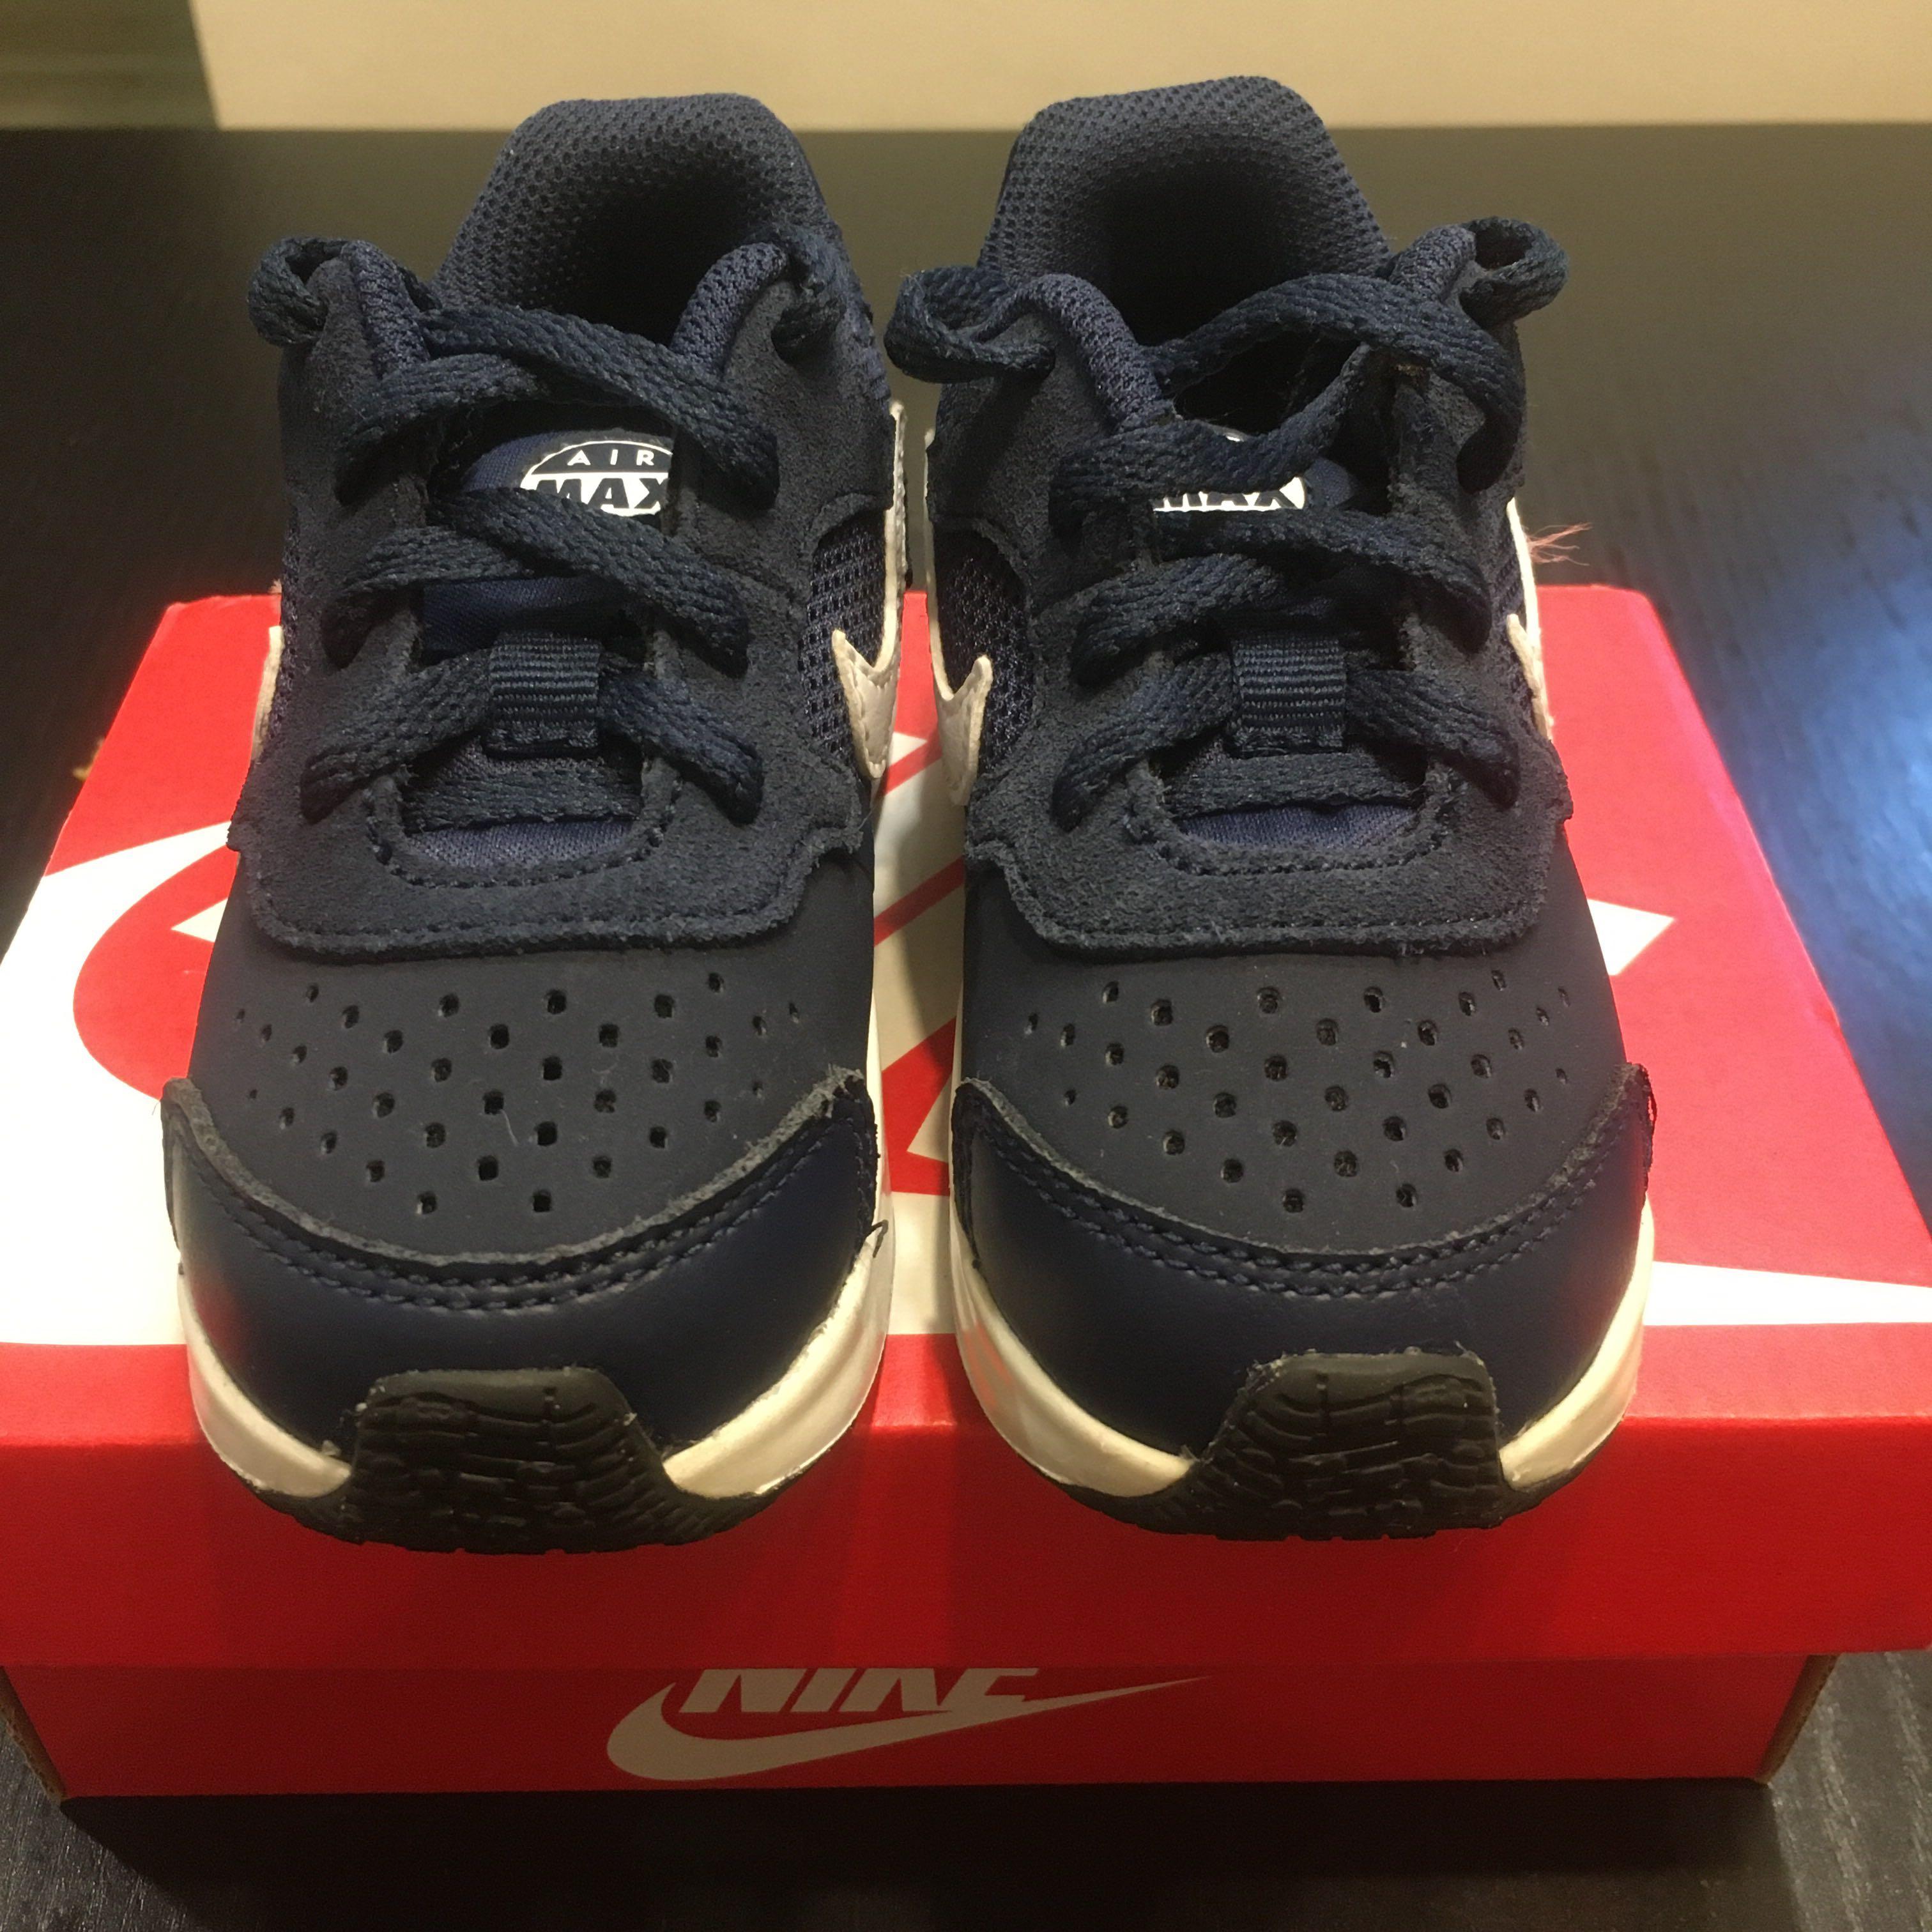 Nike Air Max Kids Shoes Size US 7 